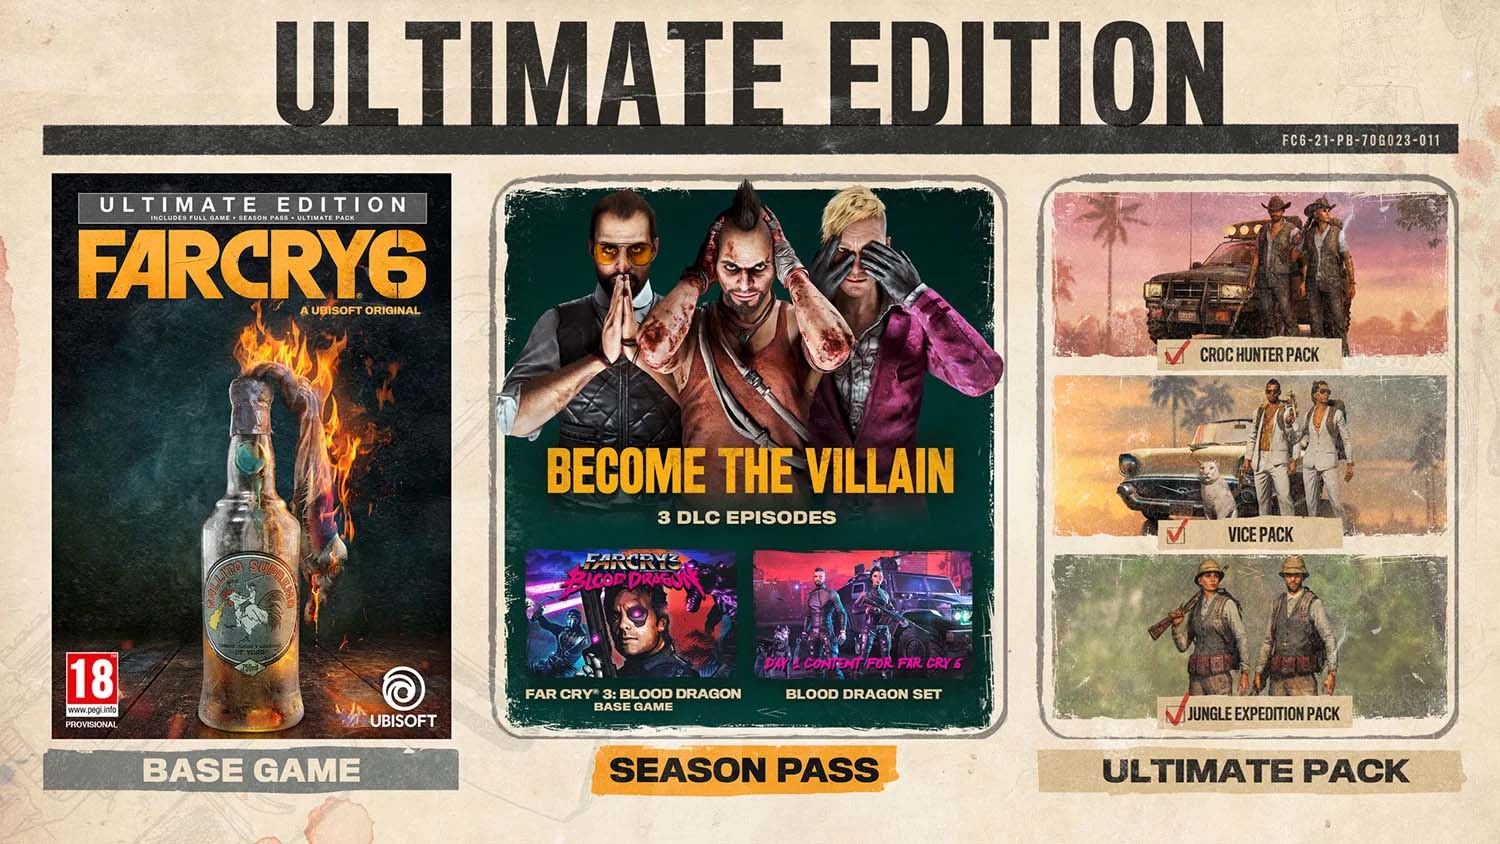 far cry 6 ps4 includes Libertad pack code